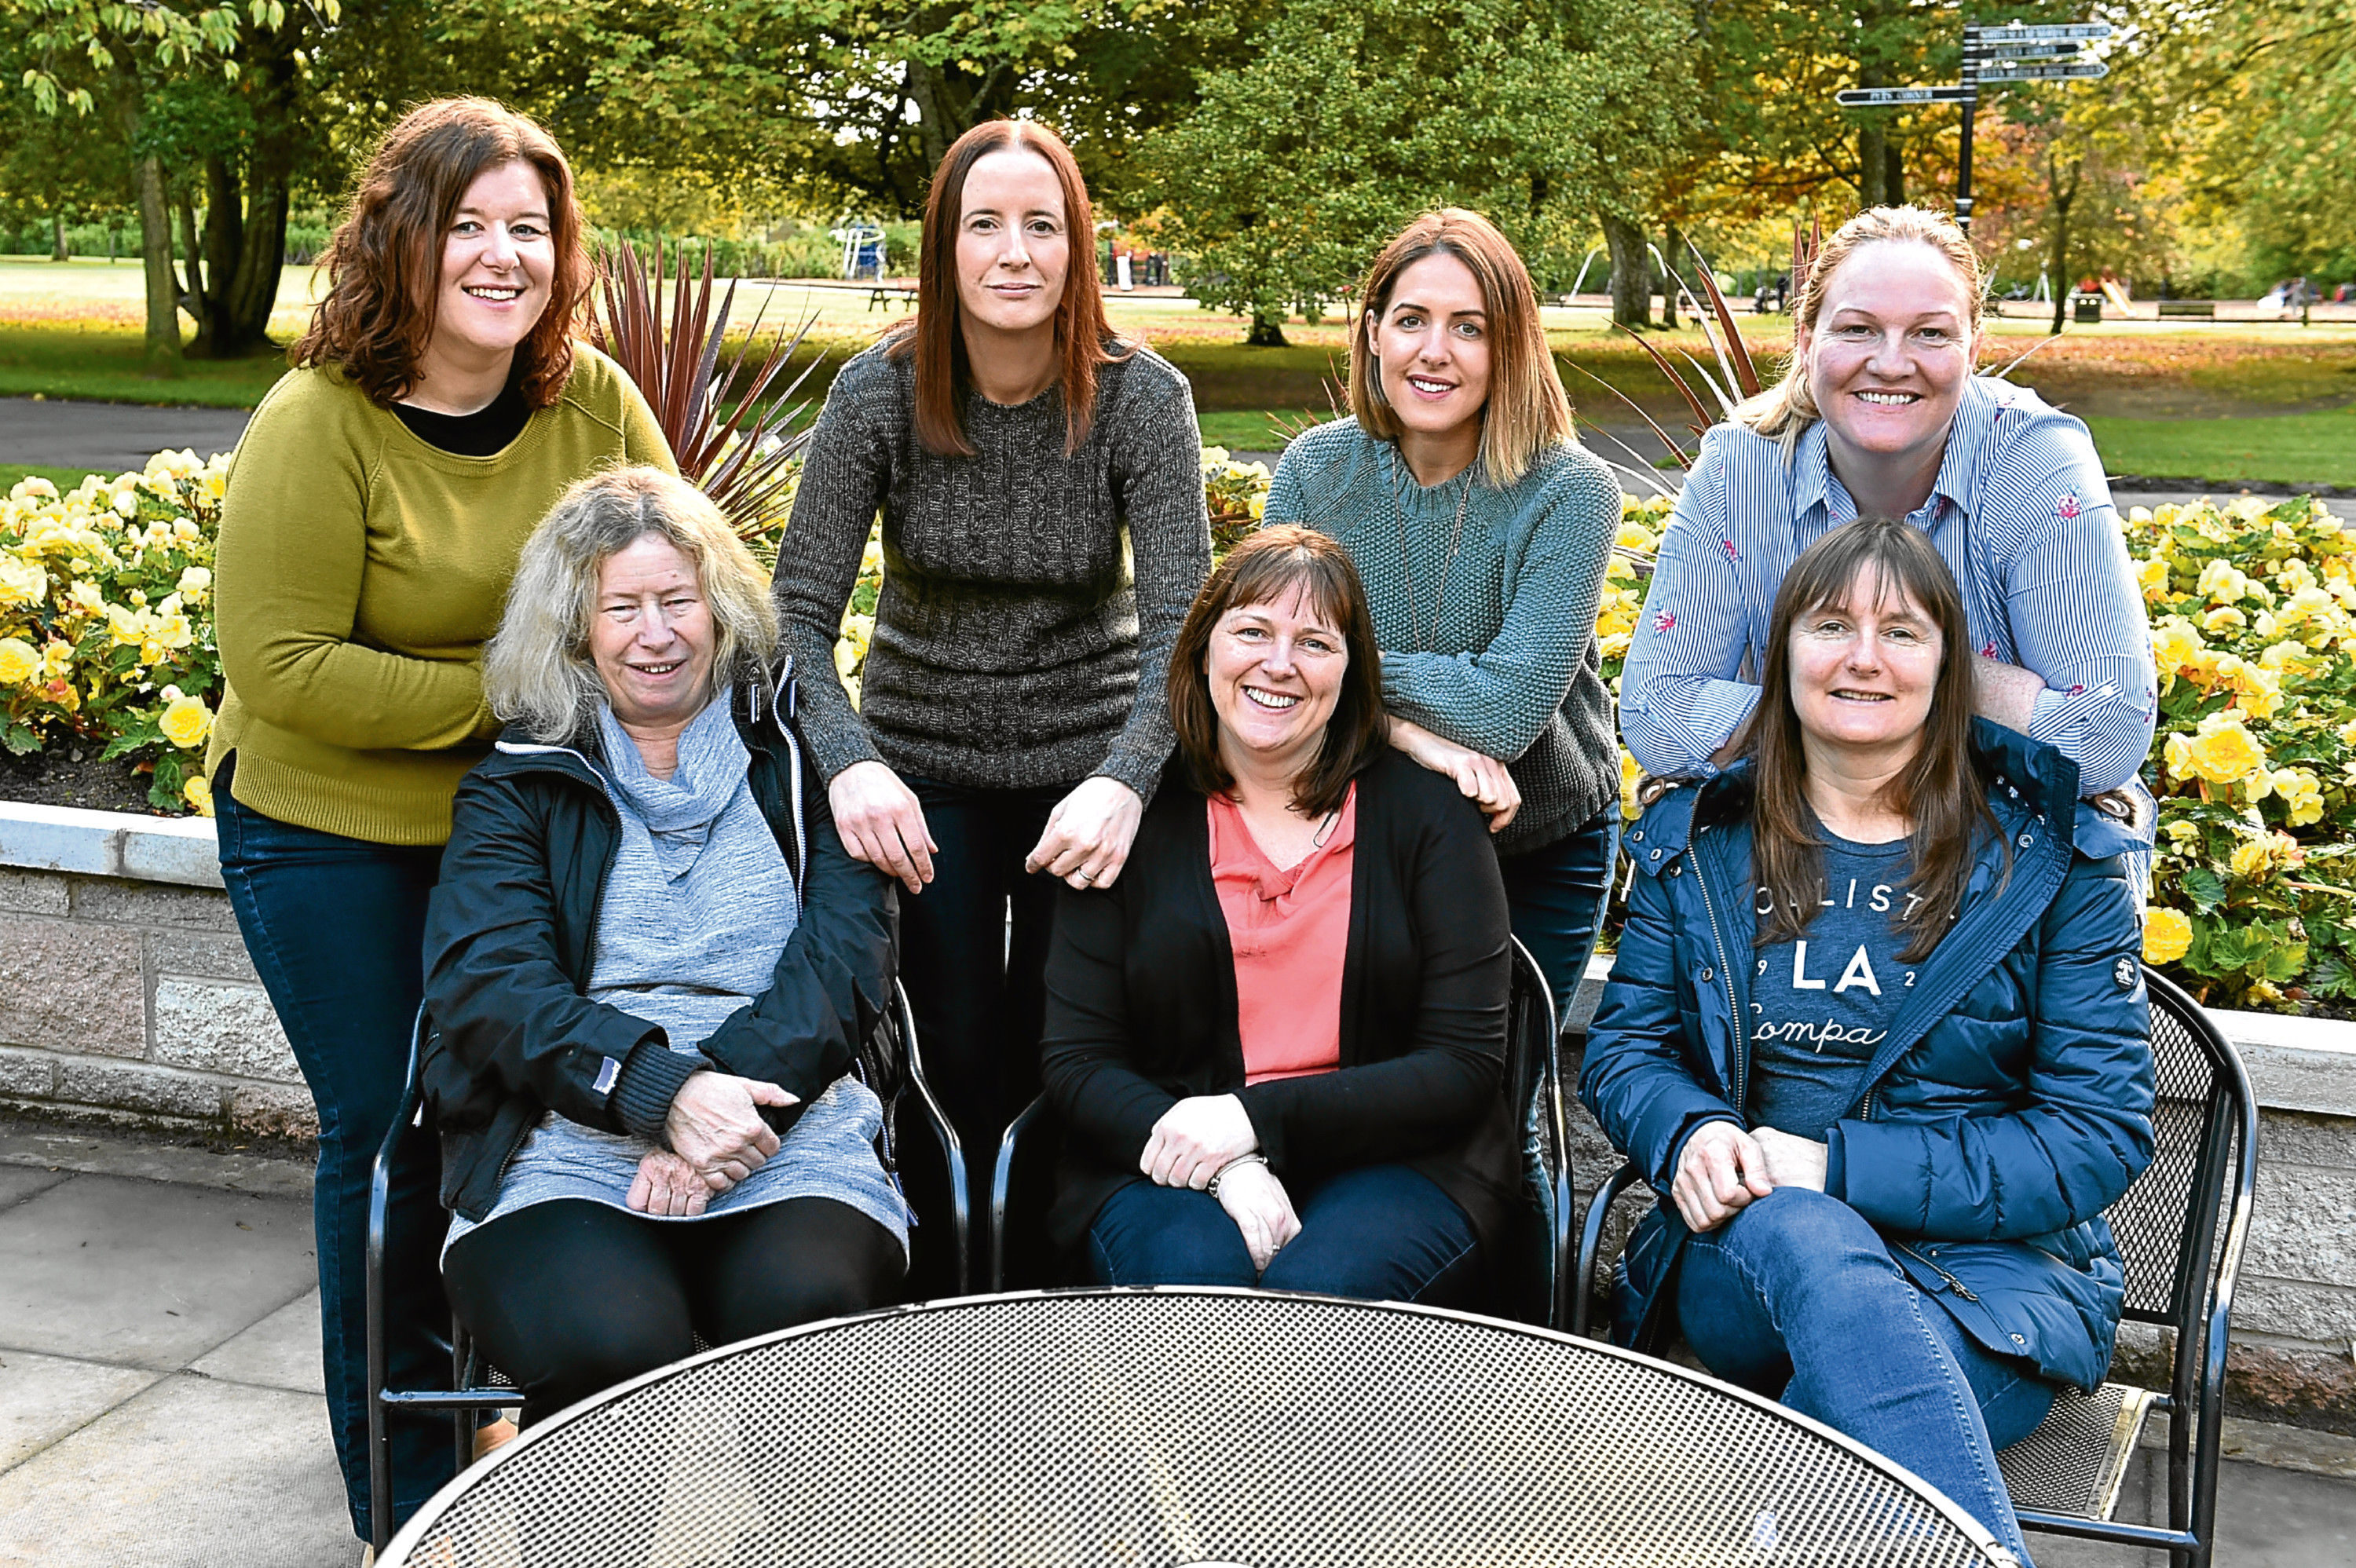 Meeting up at Hazlehead park are (front, from left) Fiona Donald, Sandra Stephen,  Susan Forsyth (back, from left)  Jennifer Yeomans, Jess Cran, Leanne Watt and Catherine Stewart. Picture by Colin Rennie.